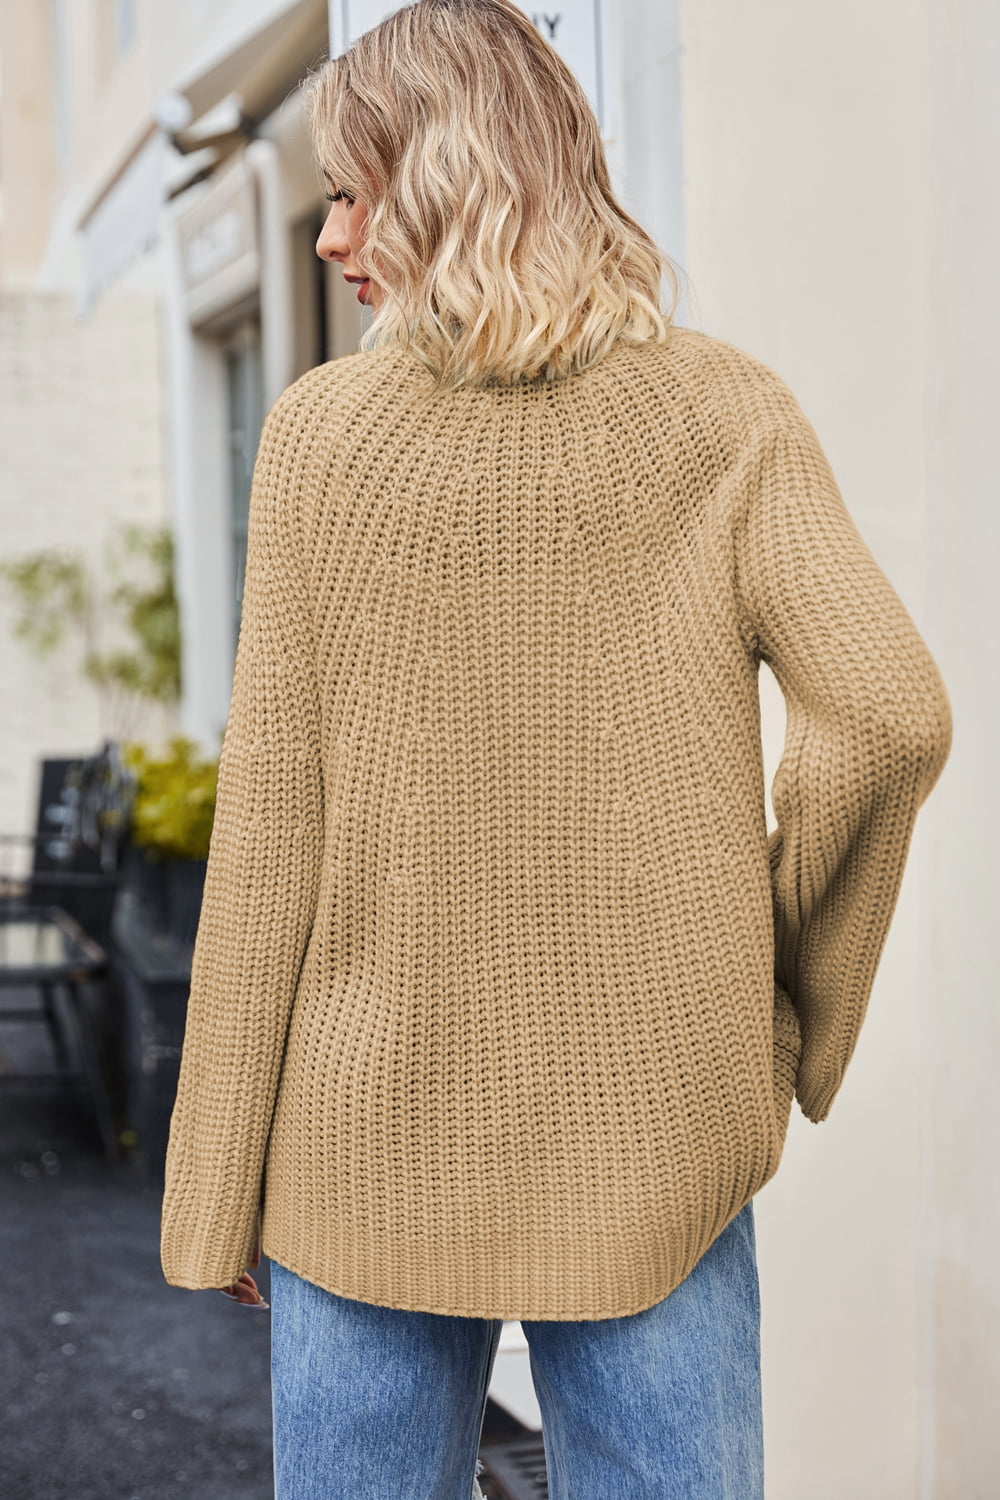 Cozy Up Waffle Knit Sweater